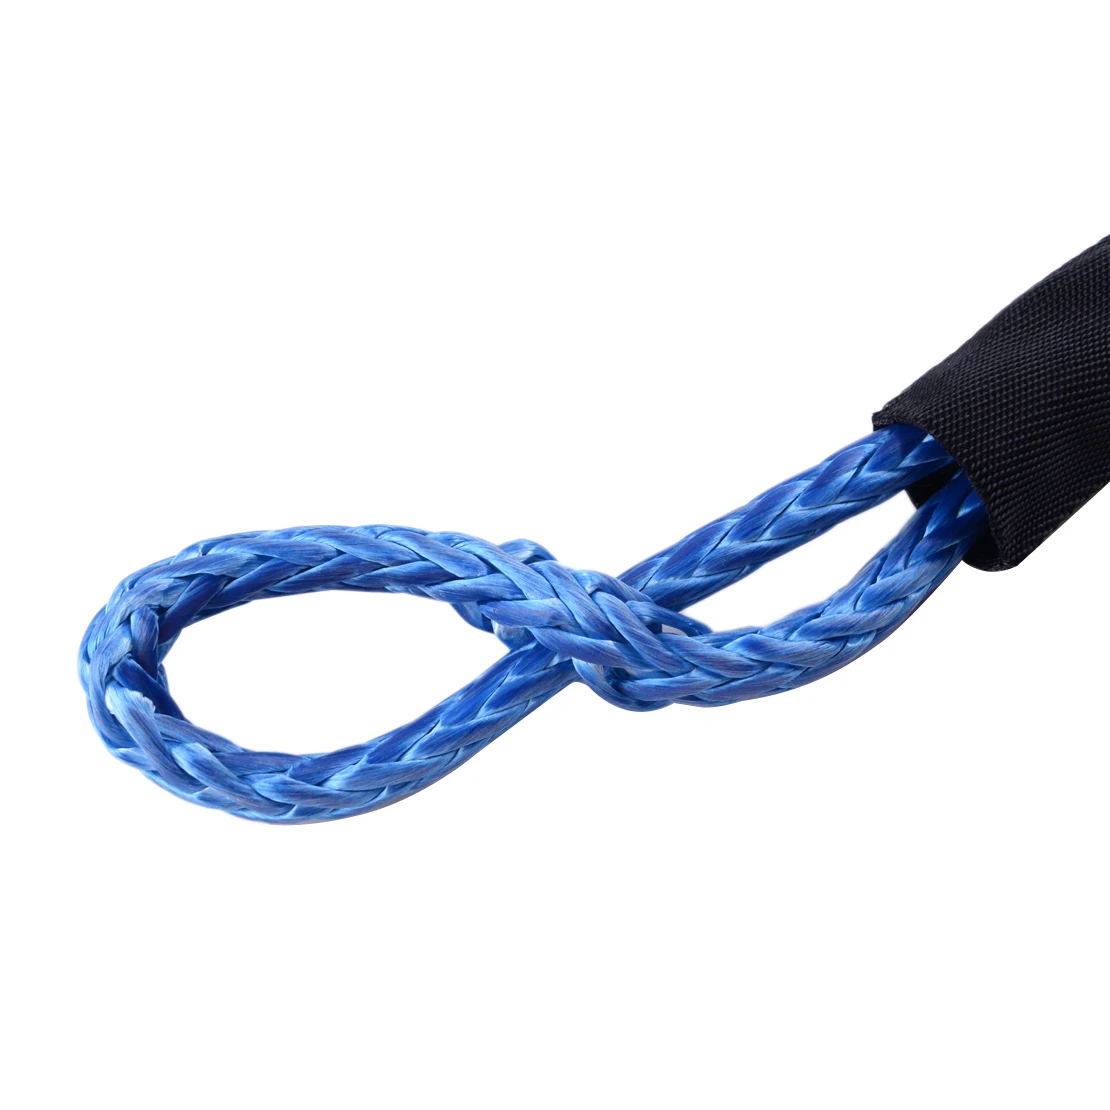 

2pcs 35,000 lbs Blue Nylon Car Flexible Synthetic Soft Shackle Winch Rope Towing Recovery Straps 35000LB 16T